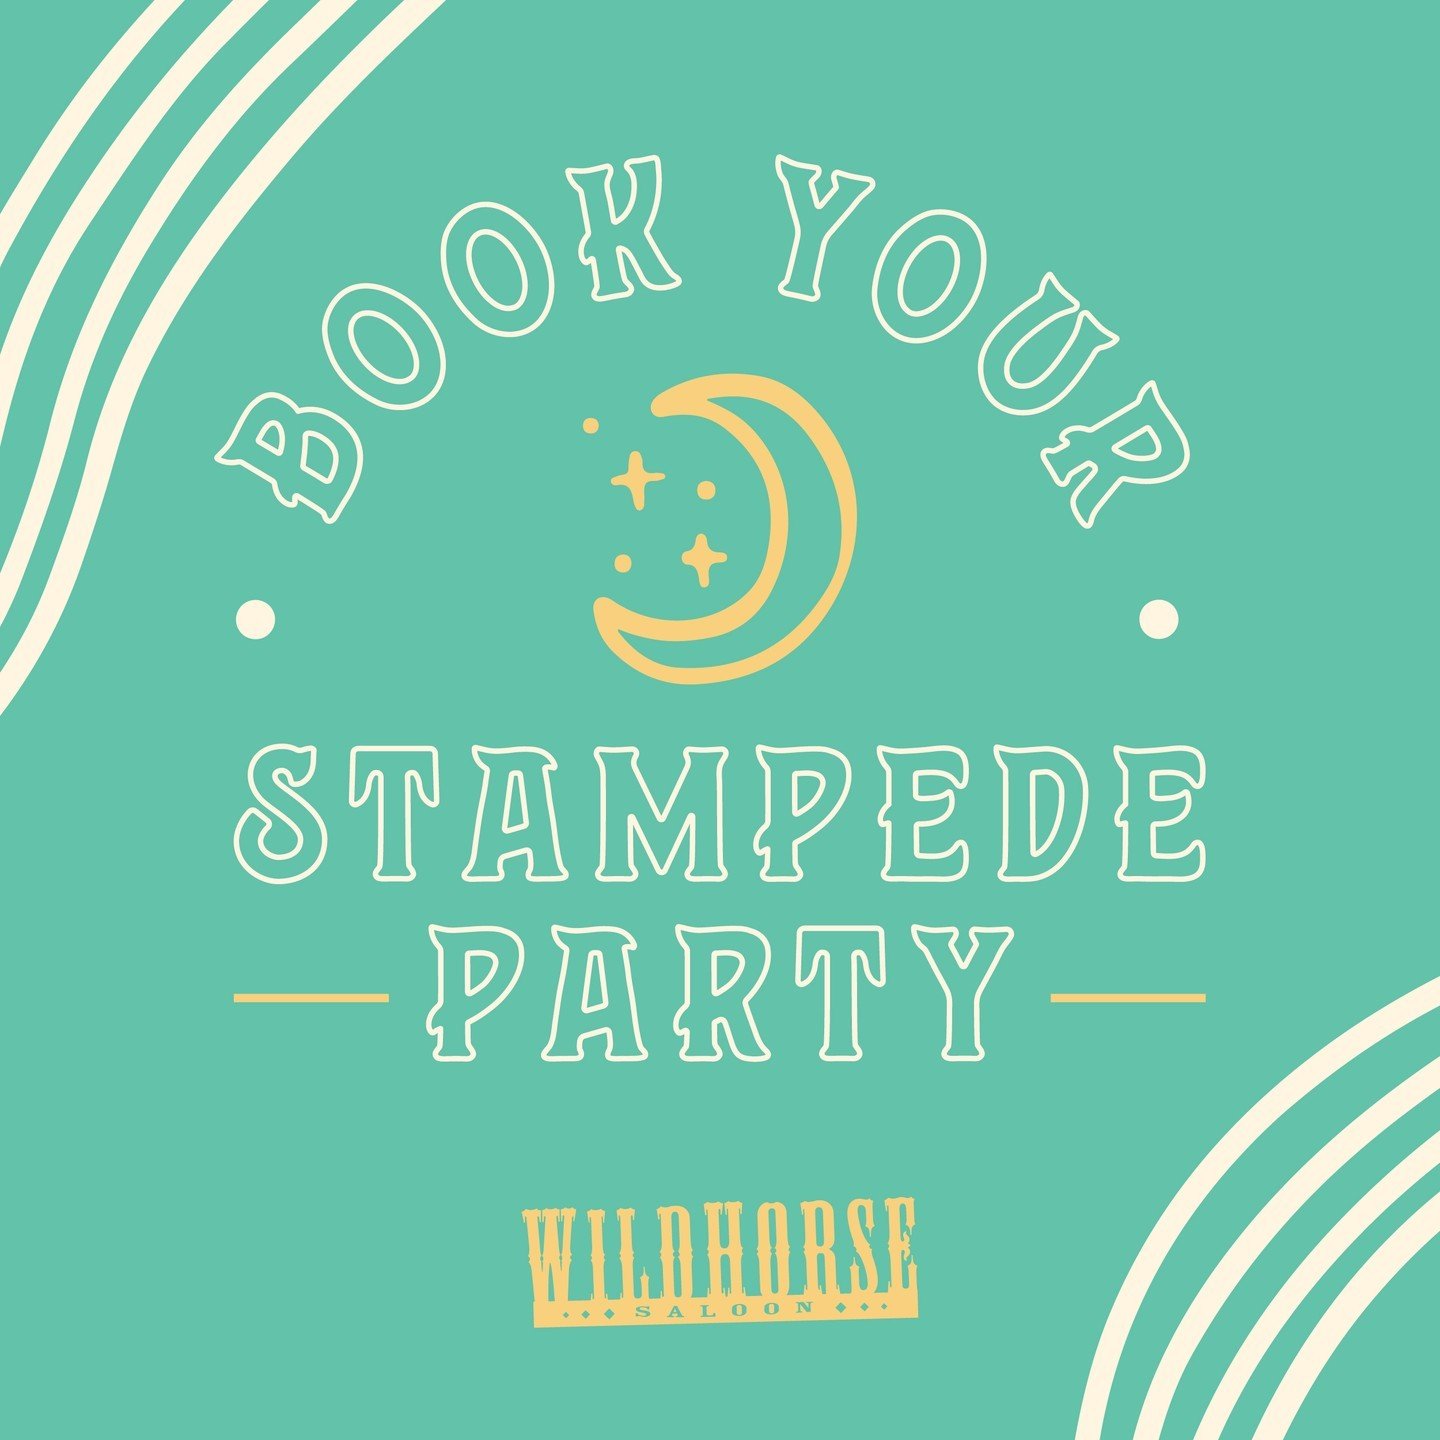 Hosting a corporate Stampede event? Wildhorse Saloon is the place to be. 🐎

Our corporate event packages include VIP entry to Wildhorse Saloon and can be tailored to suit parties starting from 50+ people. 

Work with one of our dedicated event plann